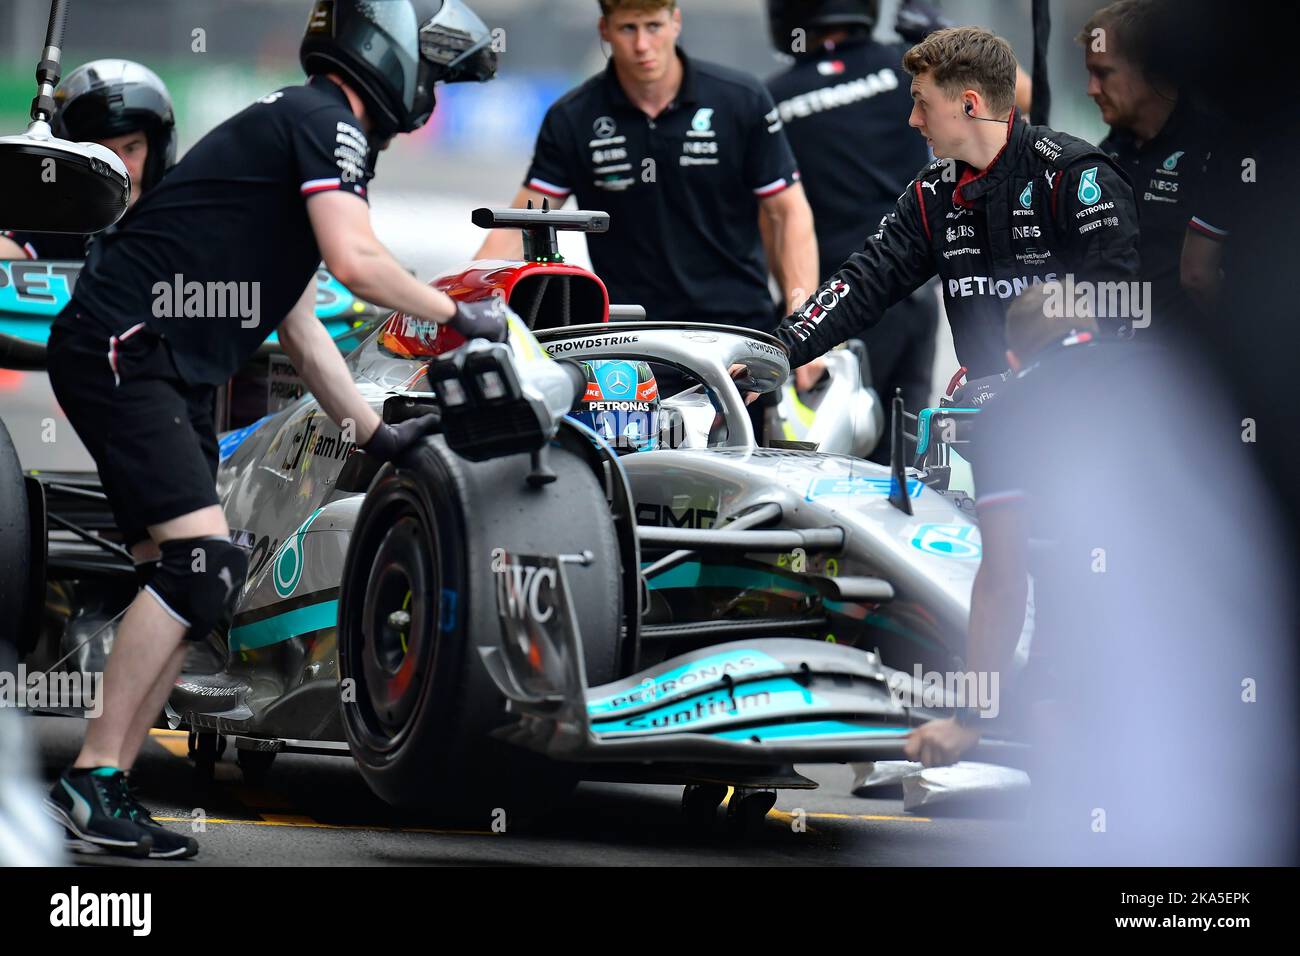 MEXICO City, MEXICO 28. October 2022: George Russell of Great Britain (N-63) Mercedes AMG Petronas F1 Team W13 during practice 2 Day prior to the Formula 1 Grand Prix of Mexico 2022, at Autodromo Hermanos Rodriguez, on October 28, 2022. SPANISH TEXT - followed by English George Russell de Gran Bretana (N-63) Mercedes AMG Petronas F1 Team W13 durante el dia de practicas 2 previo al Gran Premio de Mexico de la Formula 1 2022, en el Autodromo Hermanos Rodriguez, el 28 de Octubre de 2022. F1 Grand Prix held in the Magdalena Mixhuca Park in the Autodromo Hernando Rodriguez, Formula 1 Grand Prix Stock Photo